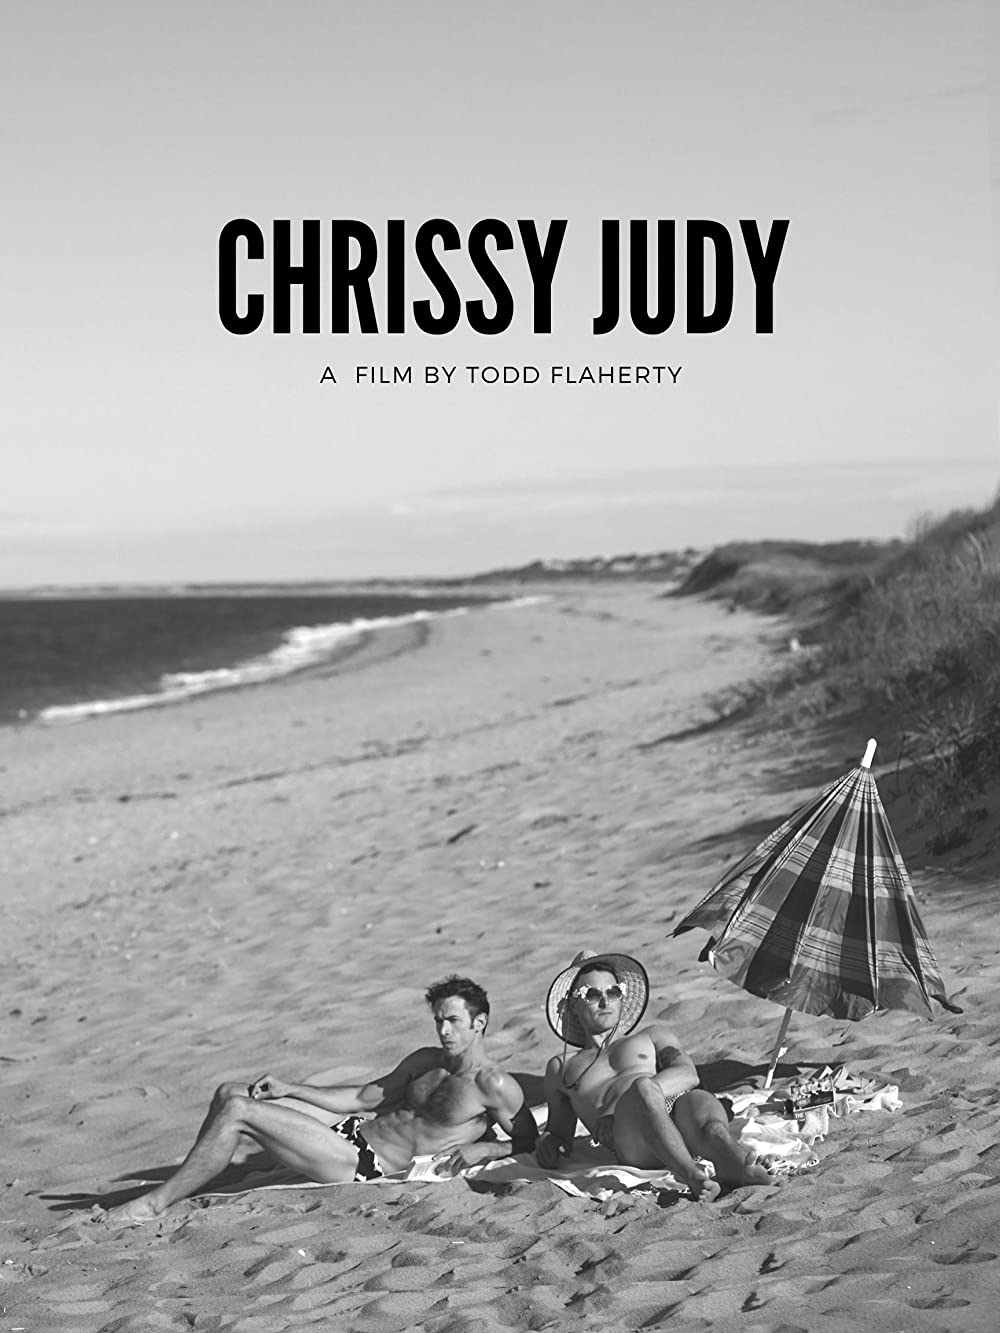 Nude Beach Sex Public Exhibitionist - Chrissy Judy: A Film Review - The Gay & Lesbian Review